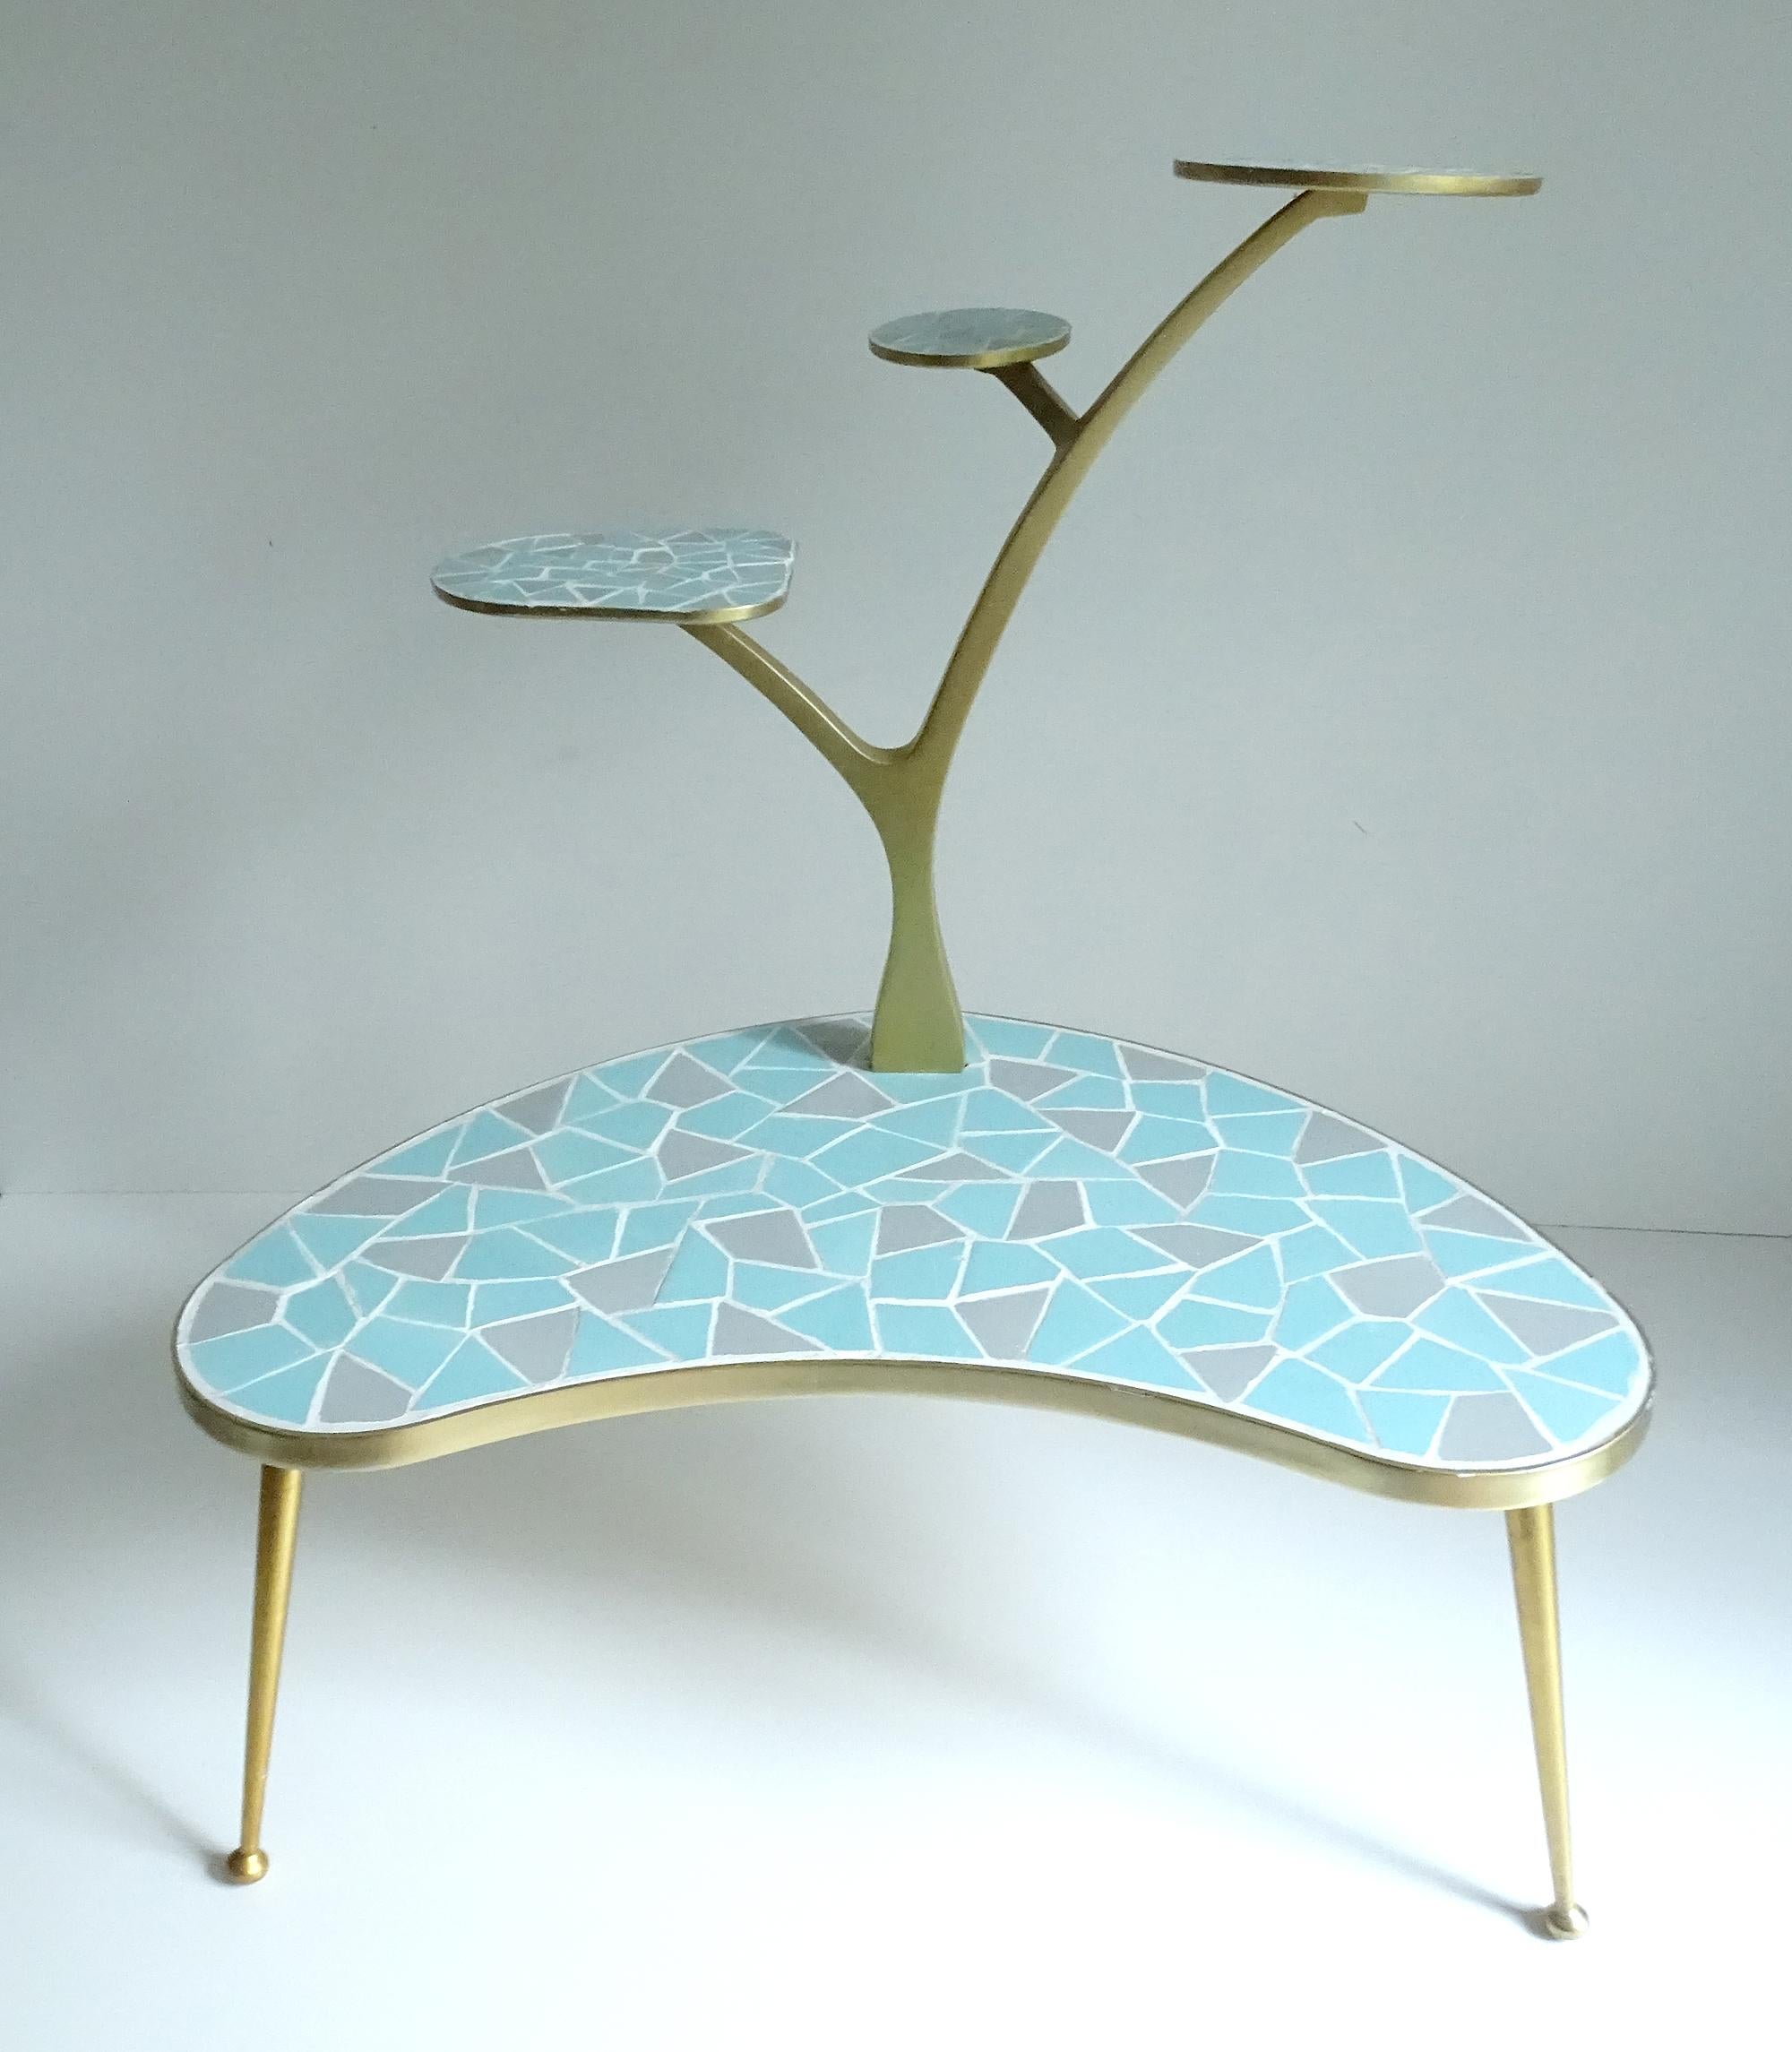  Large Mid-Century Modern side table, 1950s, tree like structure made out of solid cast gold anodized manganese-aluminum alloy with a large kidney shaped main plate and three smaller ones, the plates are adorned with Dual turquoise blue and grey